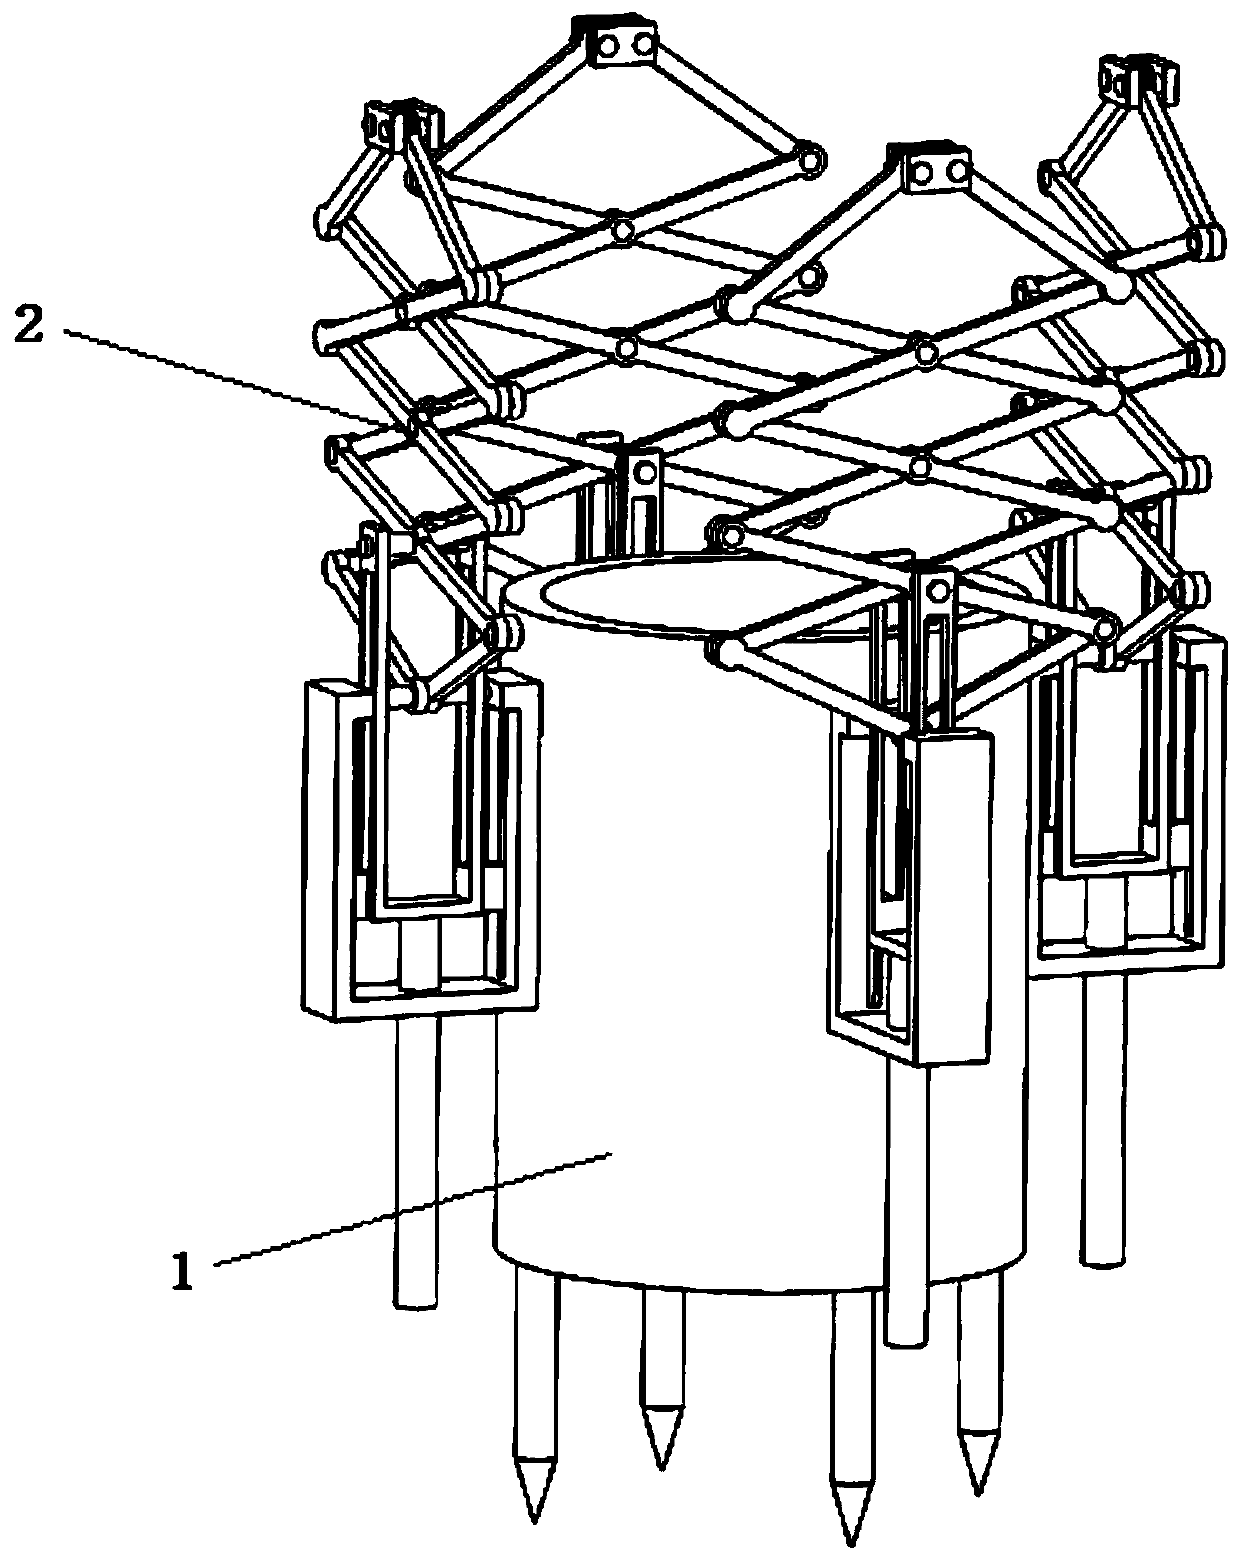 A fruit tree support structure